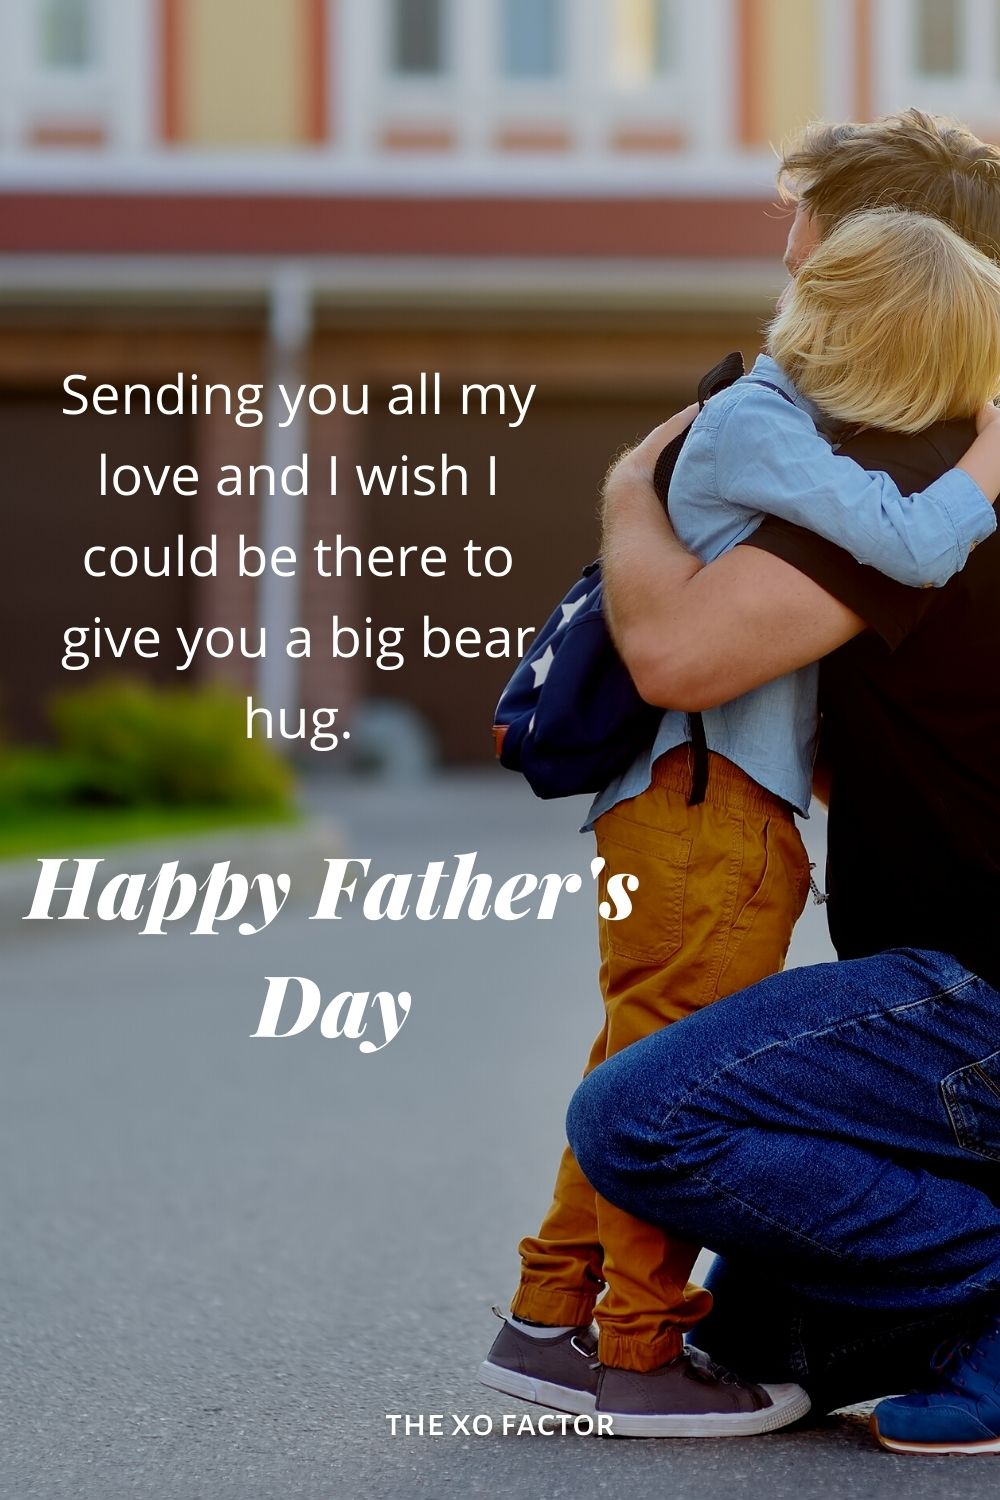 Sending you all my love and I wish I could be there to give you a big bear hug. Happy Father’s day